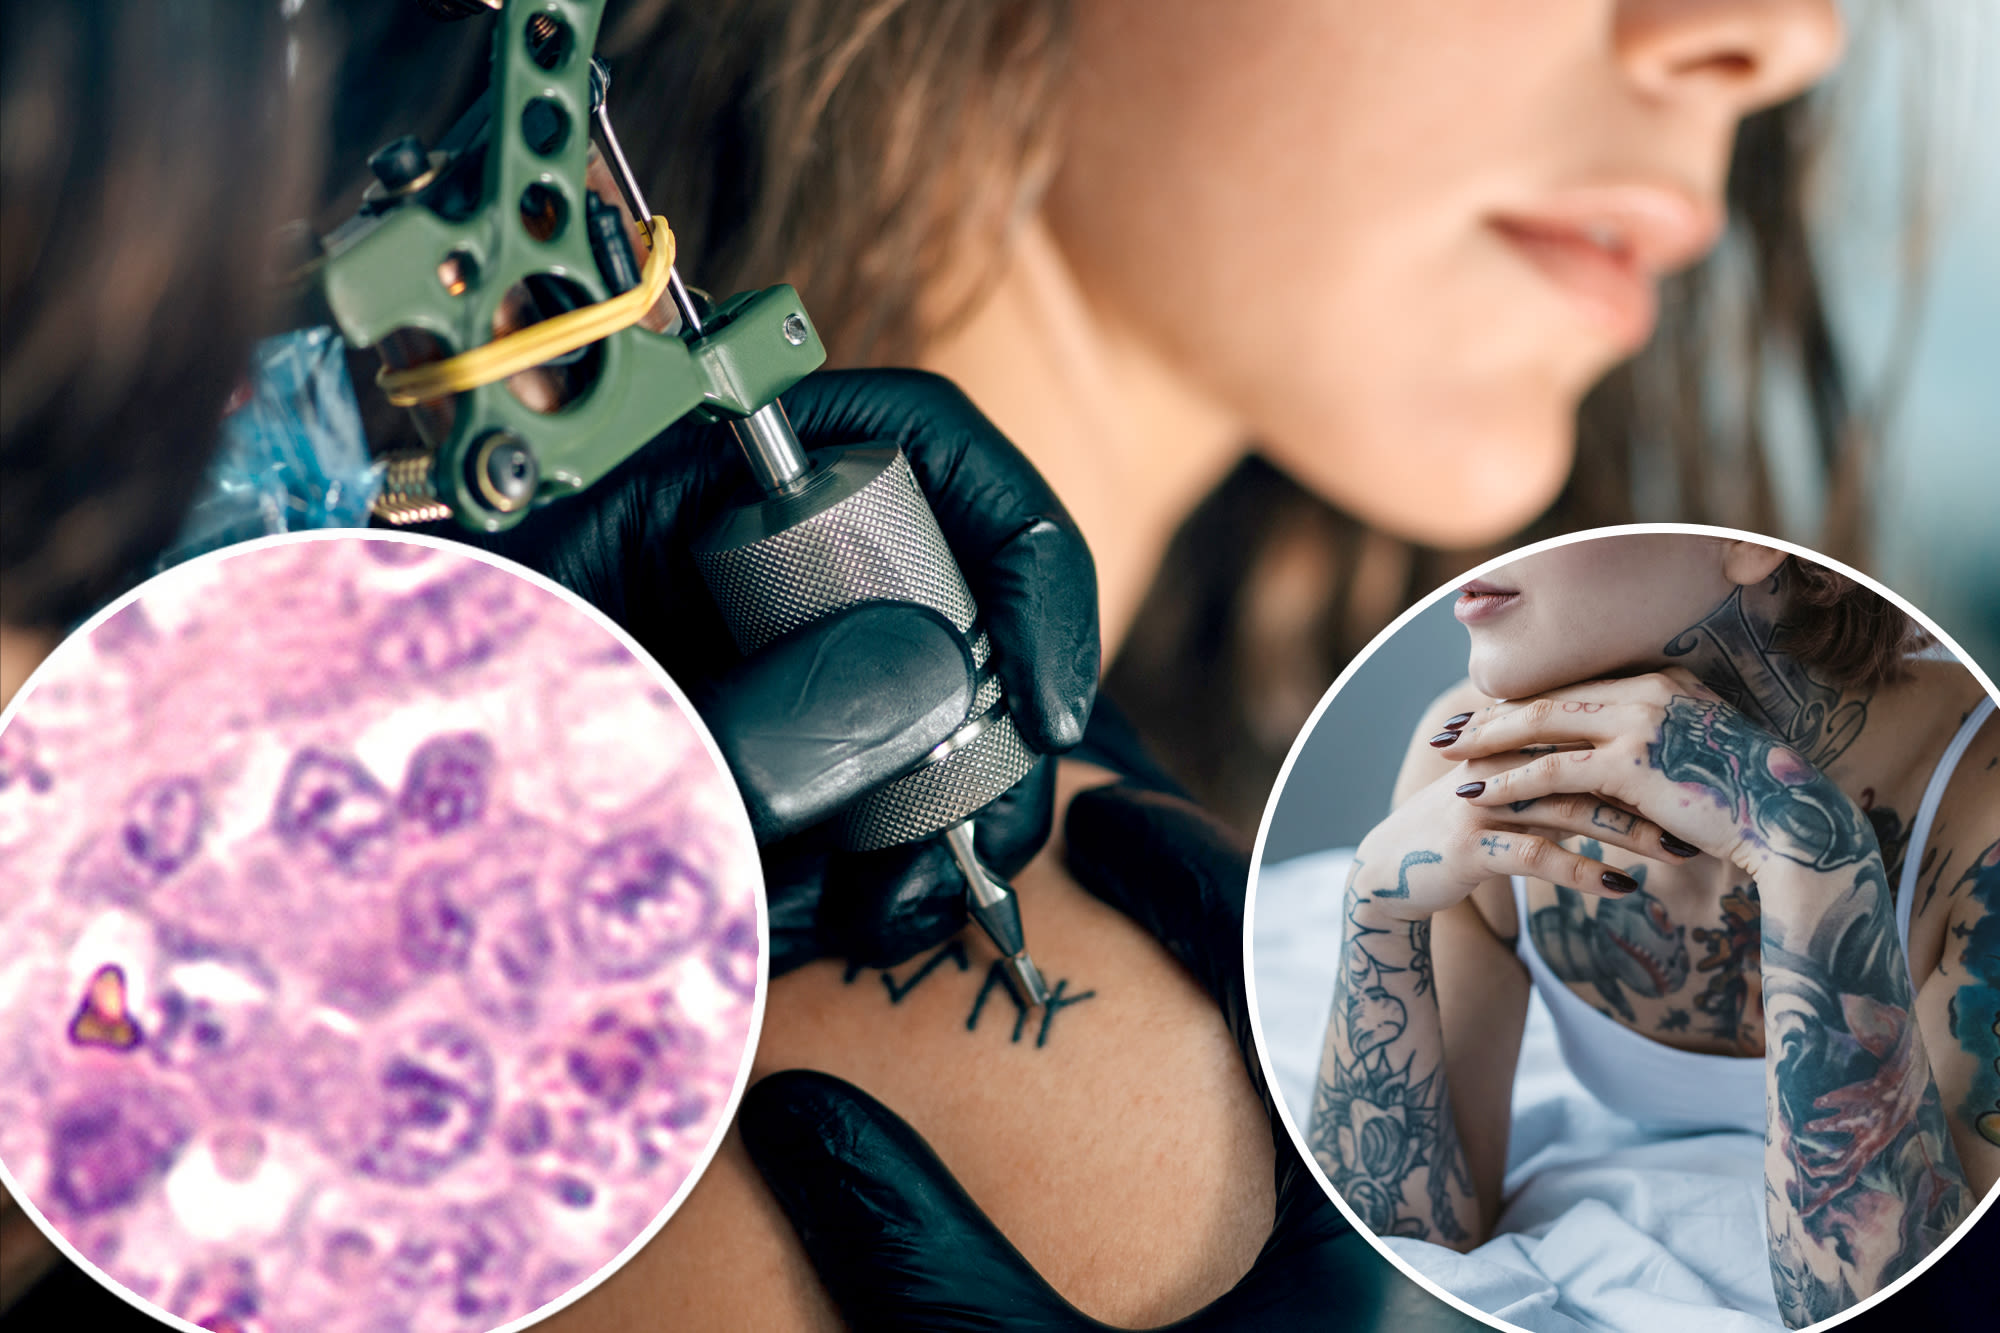 Possible link between tattoos and lymphoma revealed in new study